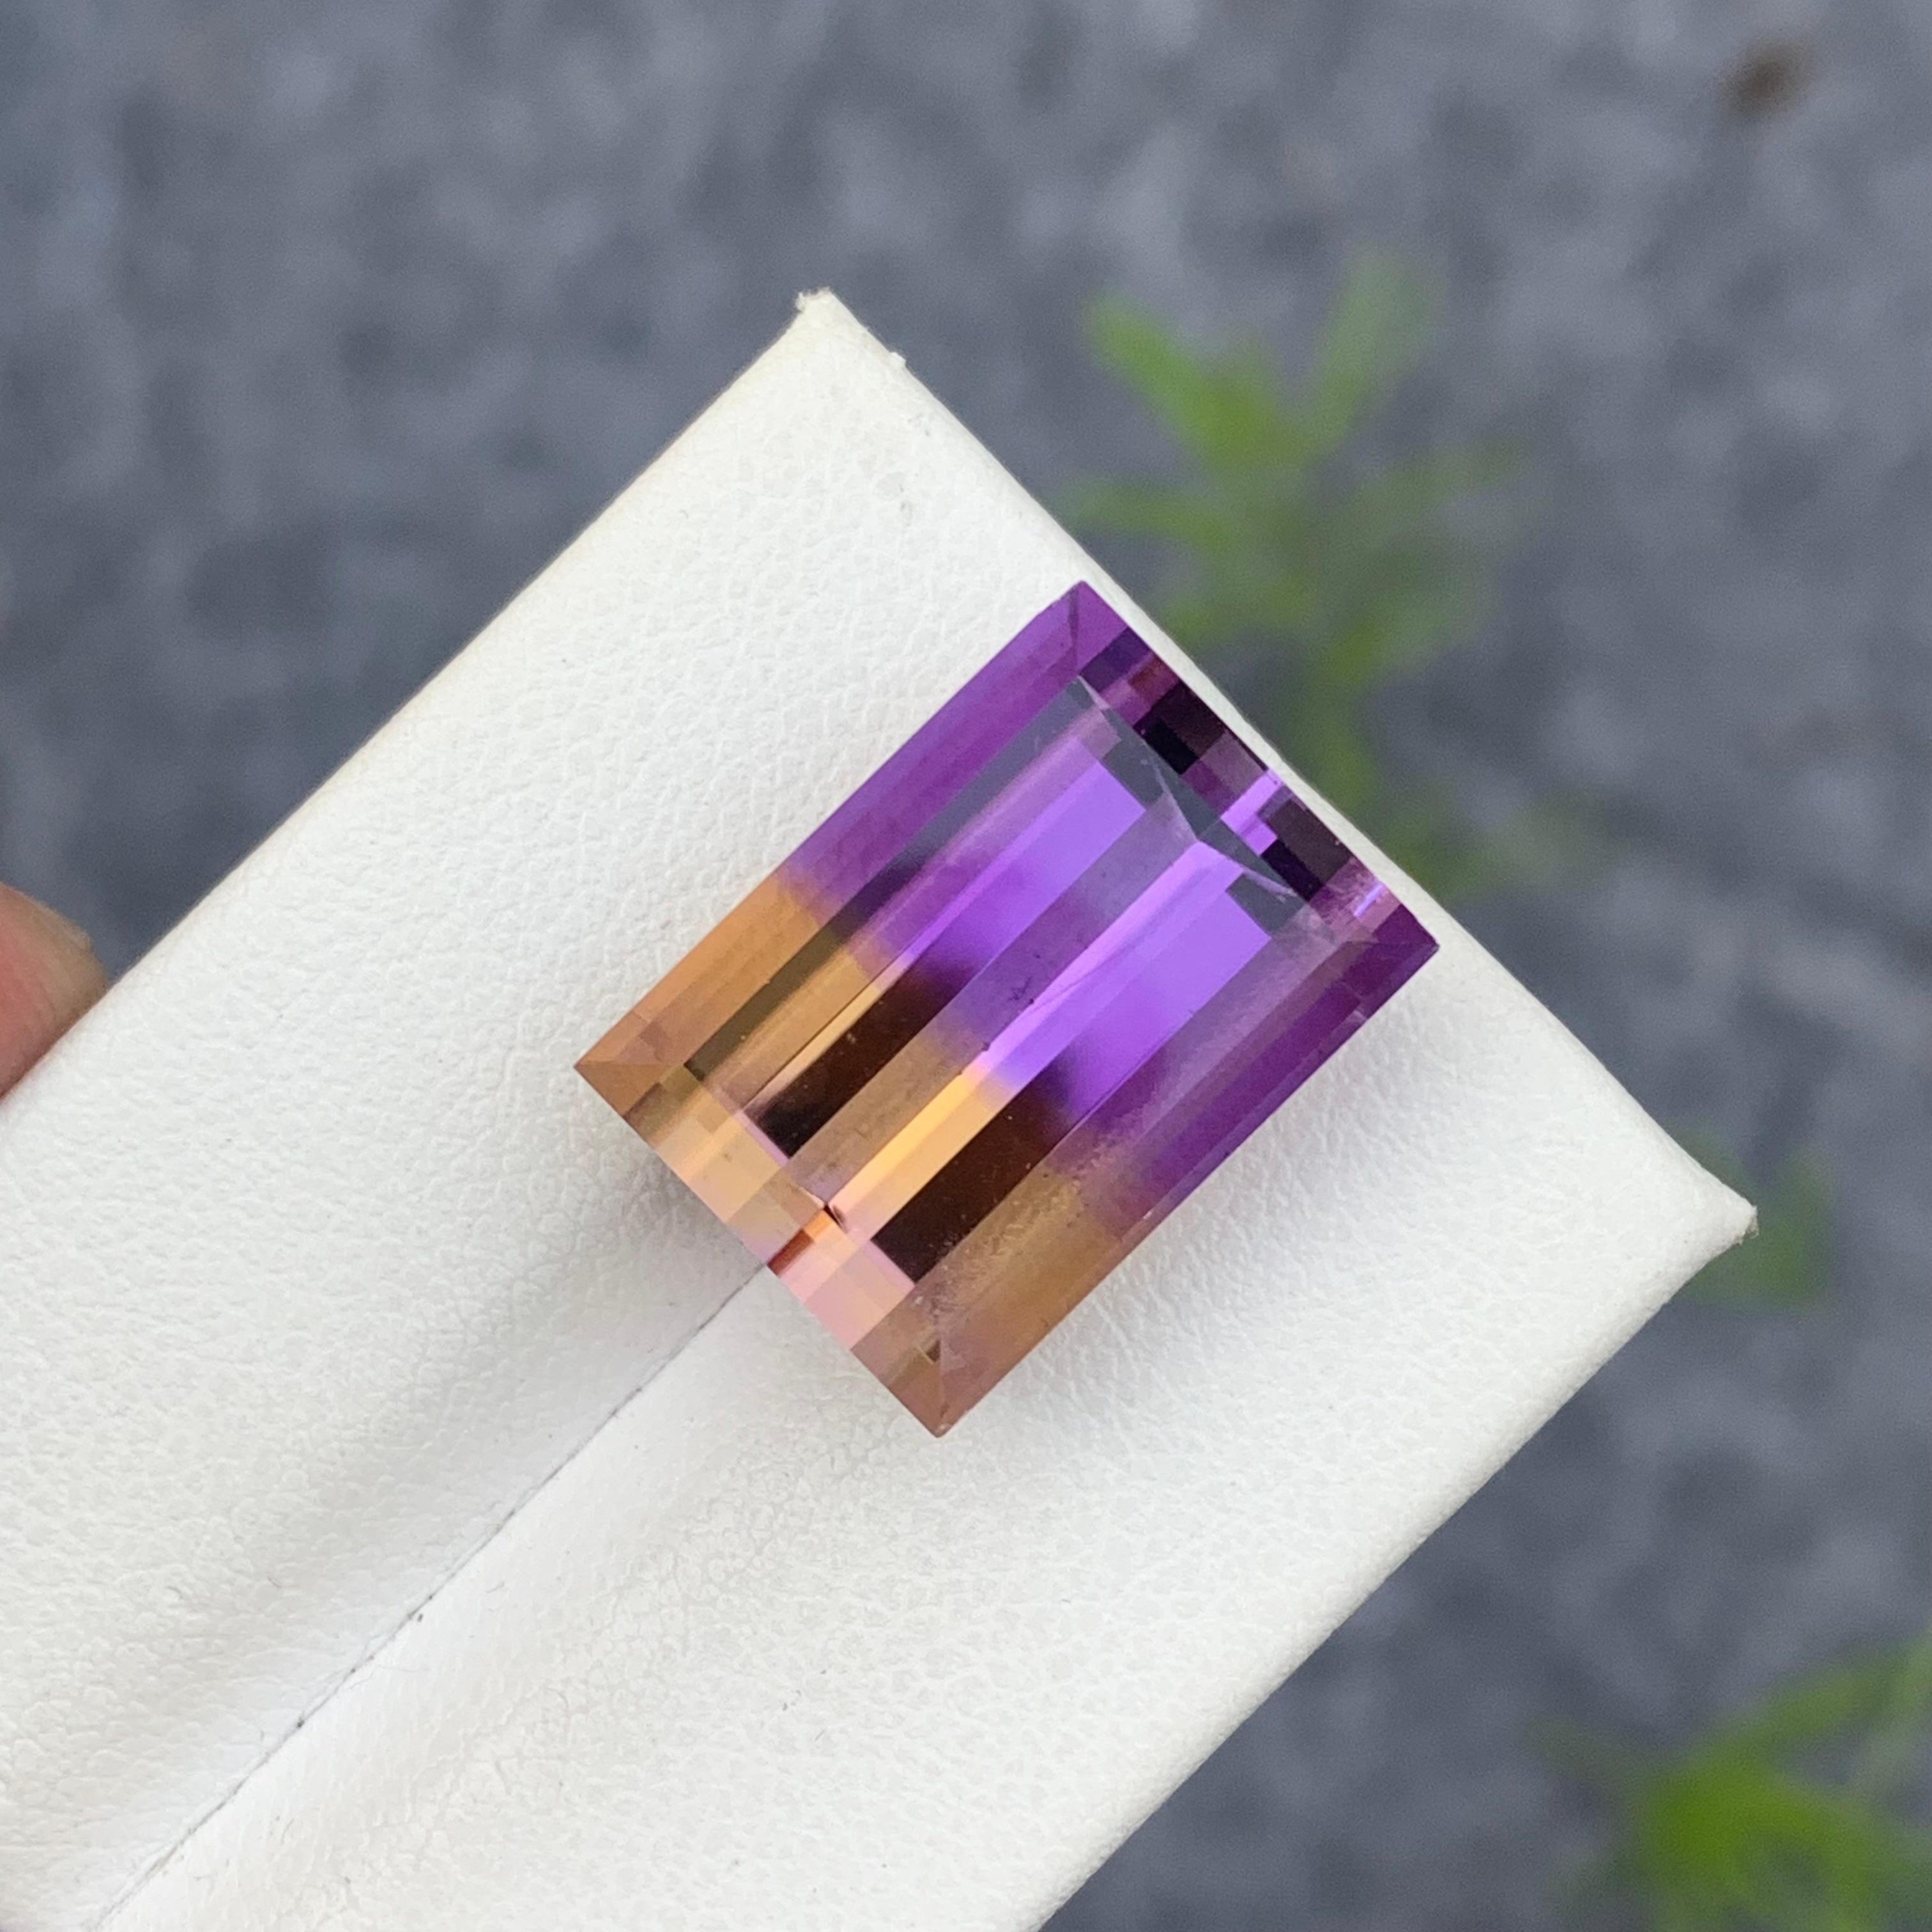 Faceted Ametrine 
Weight: 15.50 Carats
Dimension: 16.6x12.3x9.5 Mm
Origin: Bolivia
Shape: Baguette
Color: Purple & Yellow
Clarity: Eye Clean
Certificate: On Demand
For those born in the month of February, you've been graced with amethyst as your